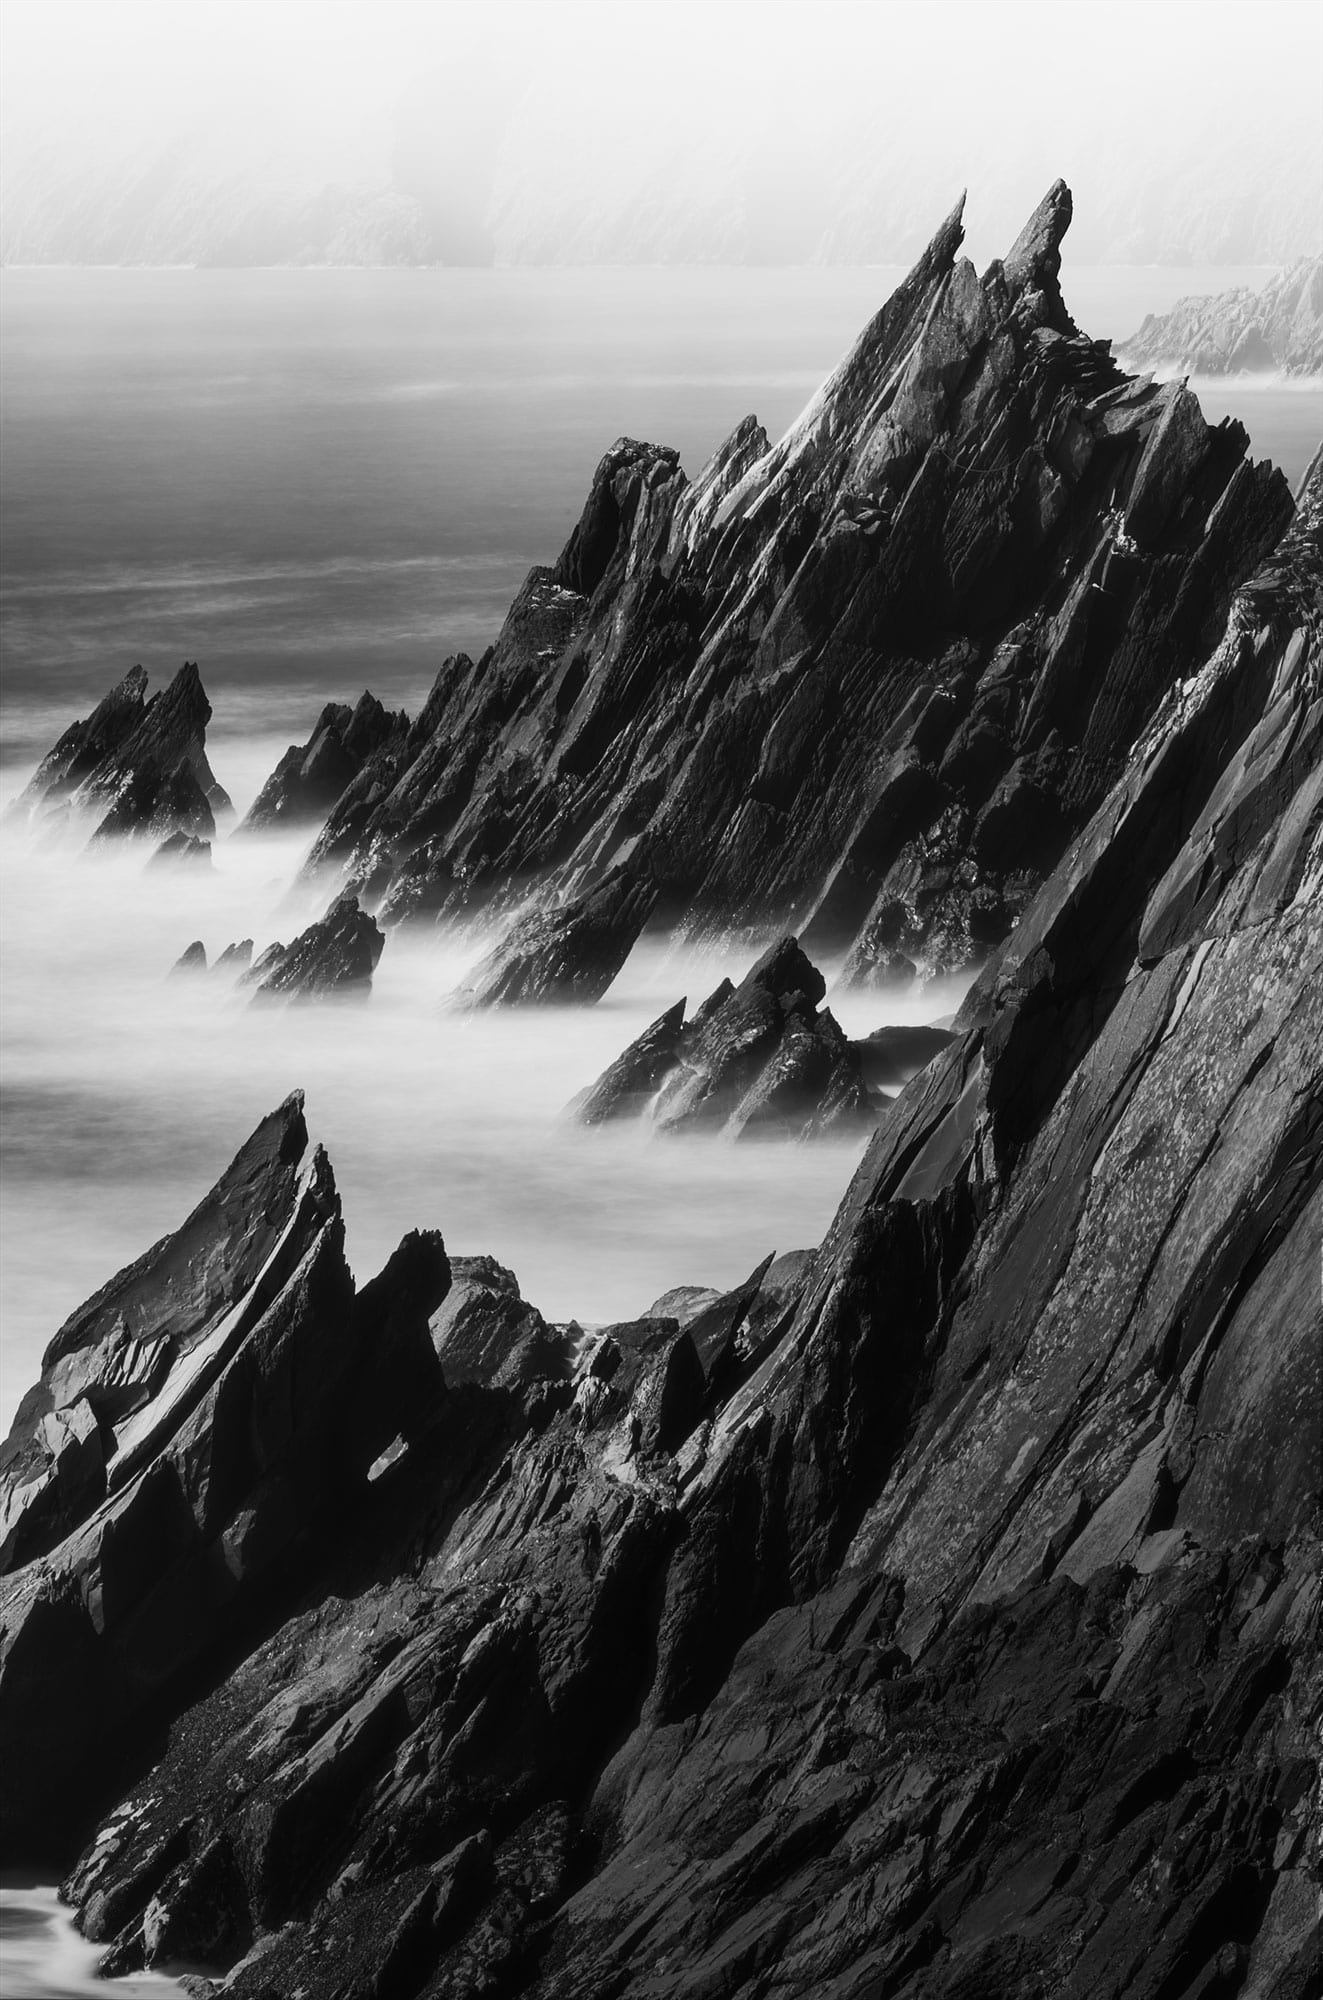 A striking black and white landscape photograph of the black rocks at Coumeenoole Beach on the Dingle Peninsula in Ireland. This long exposure image captures the rugged beauty of the Wild Atlantic Way, taken with a Nikon Z8 camera.